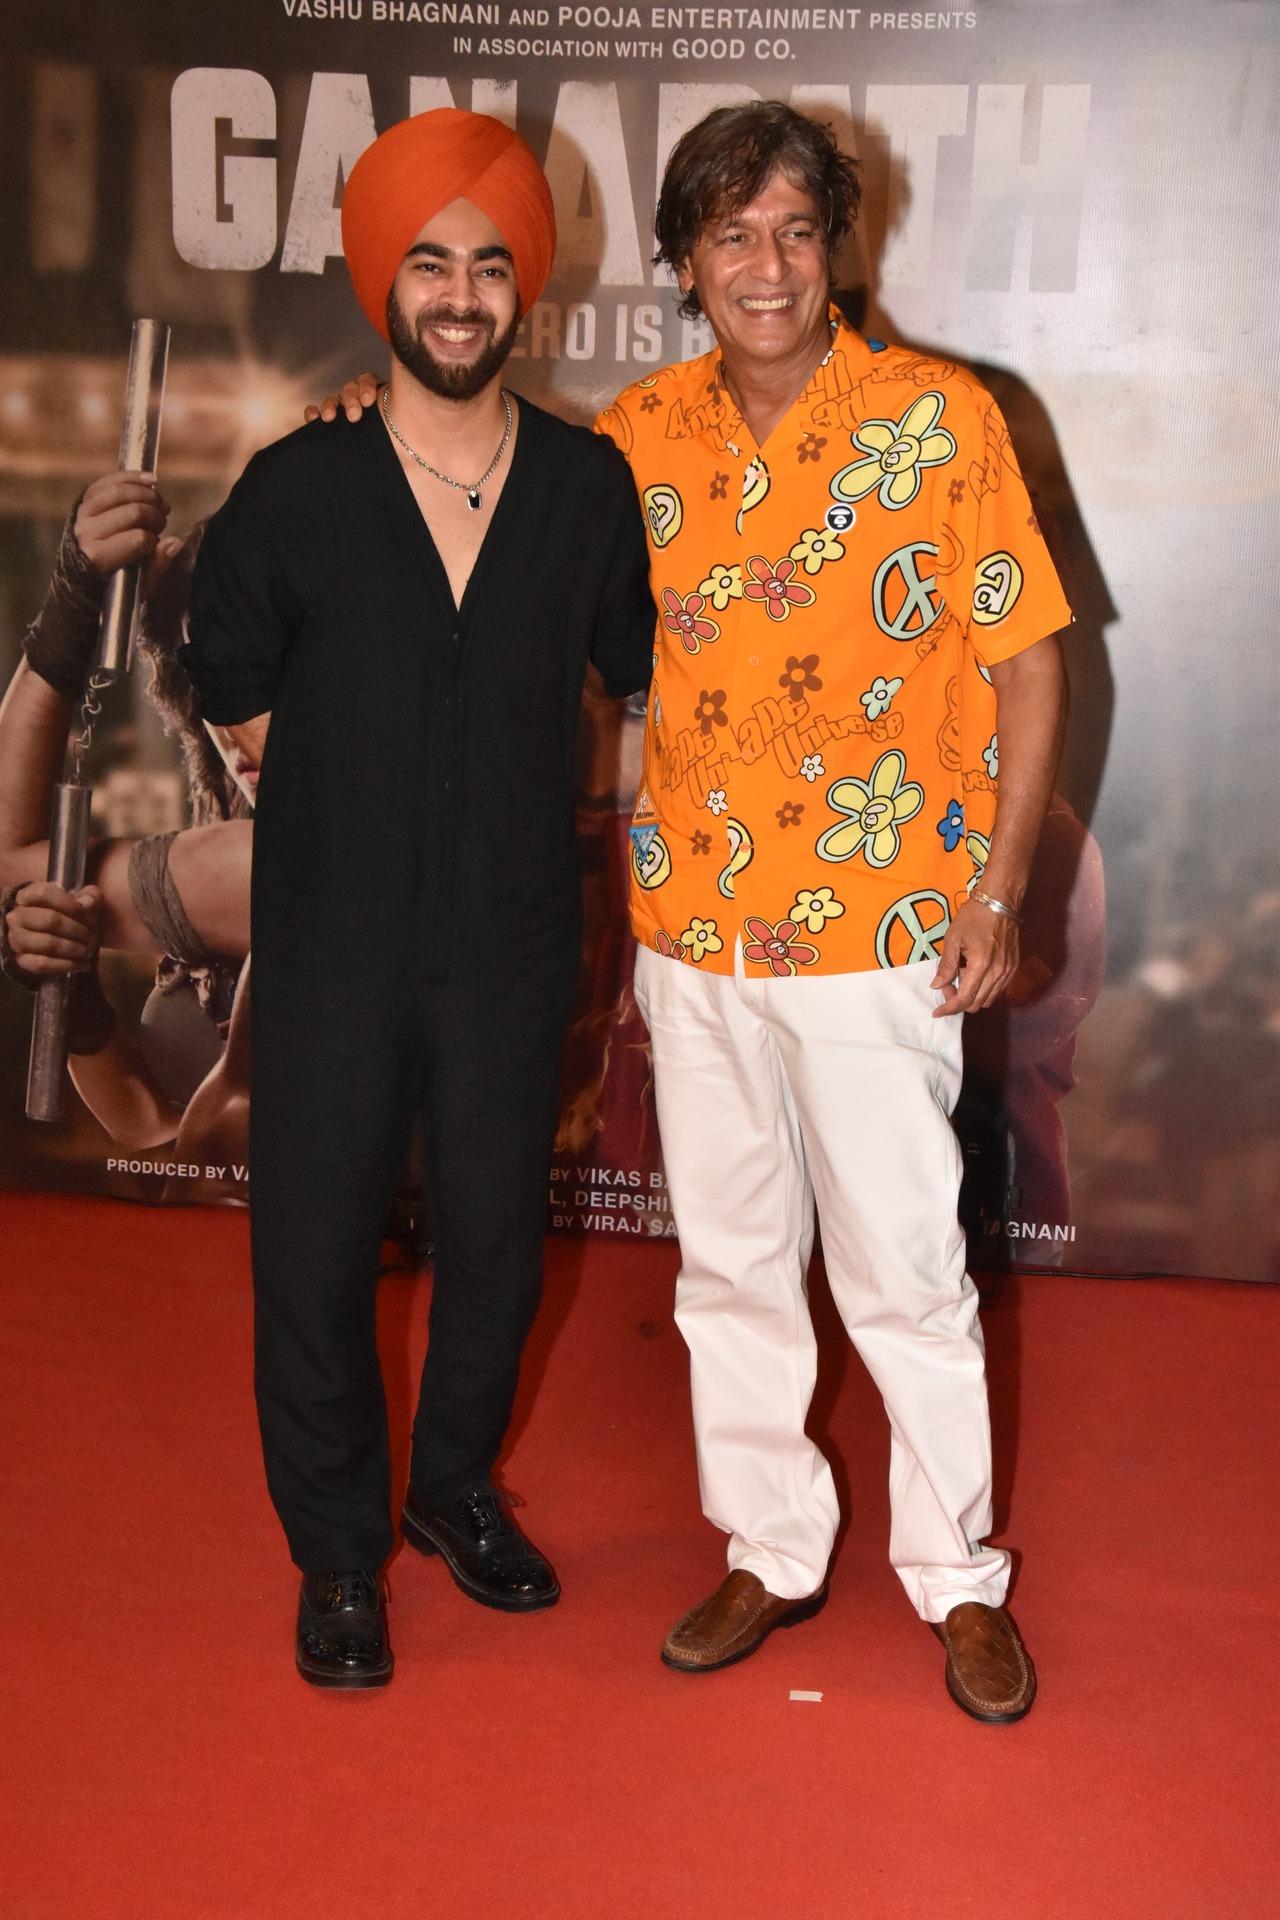 Manjot Singh poses with Chunky Panday